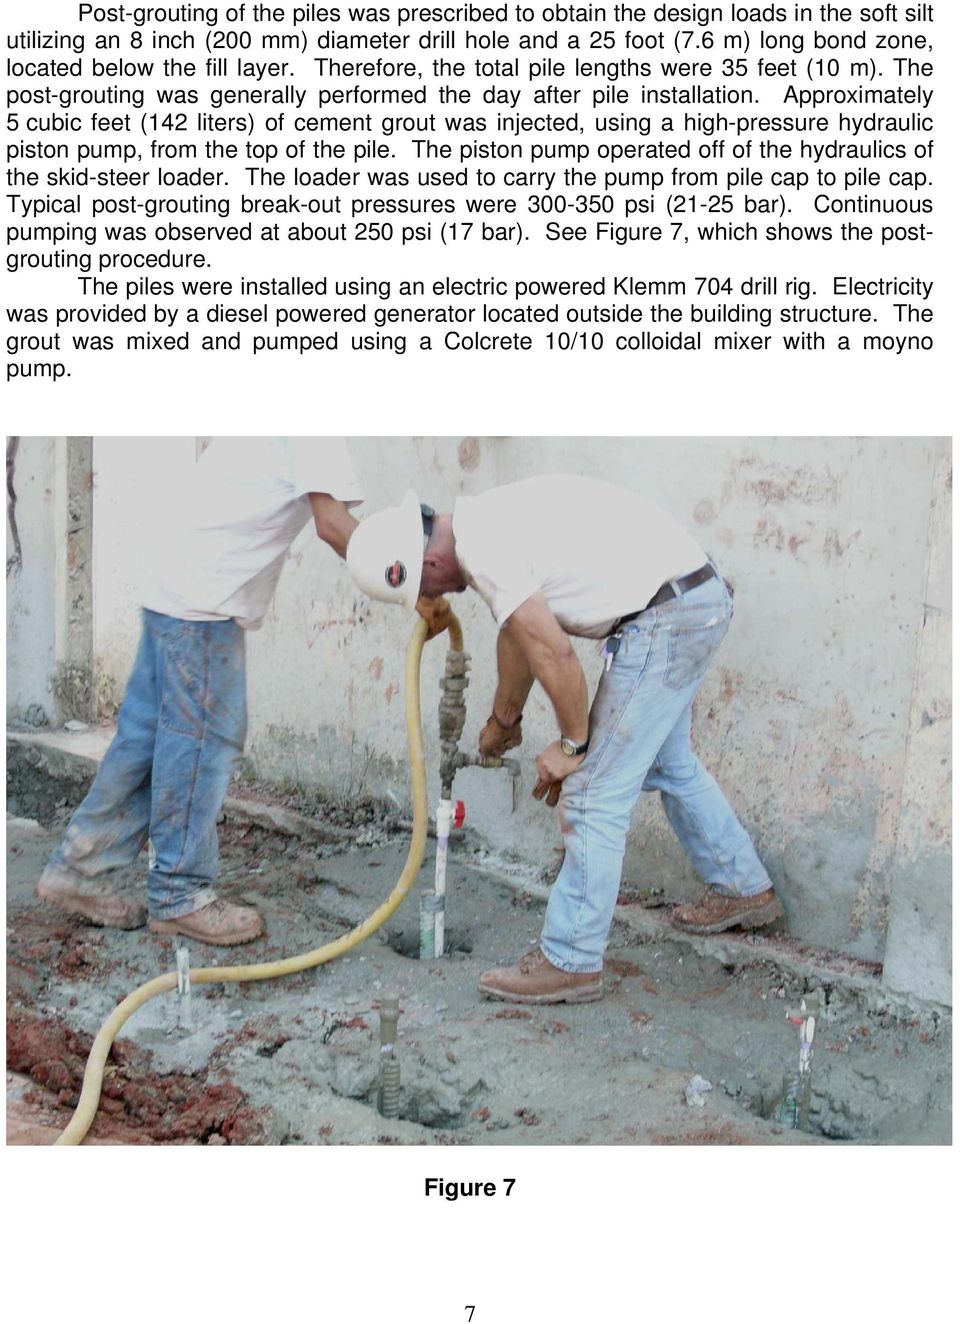 Approximately 5 cubic feet (142 liters) of cement grout was injected, using a high-pressure hydraulic piston pump, from the top of the pile.